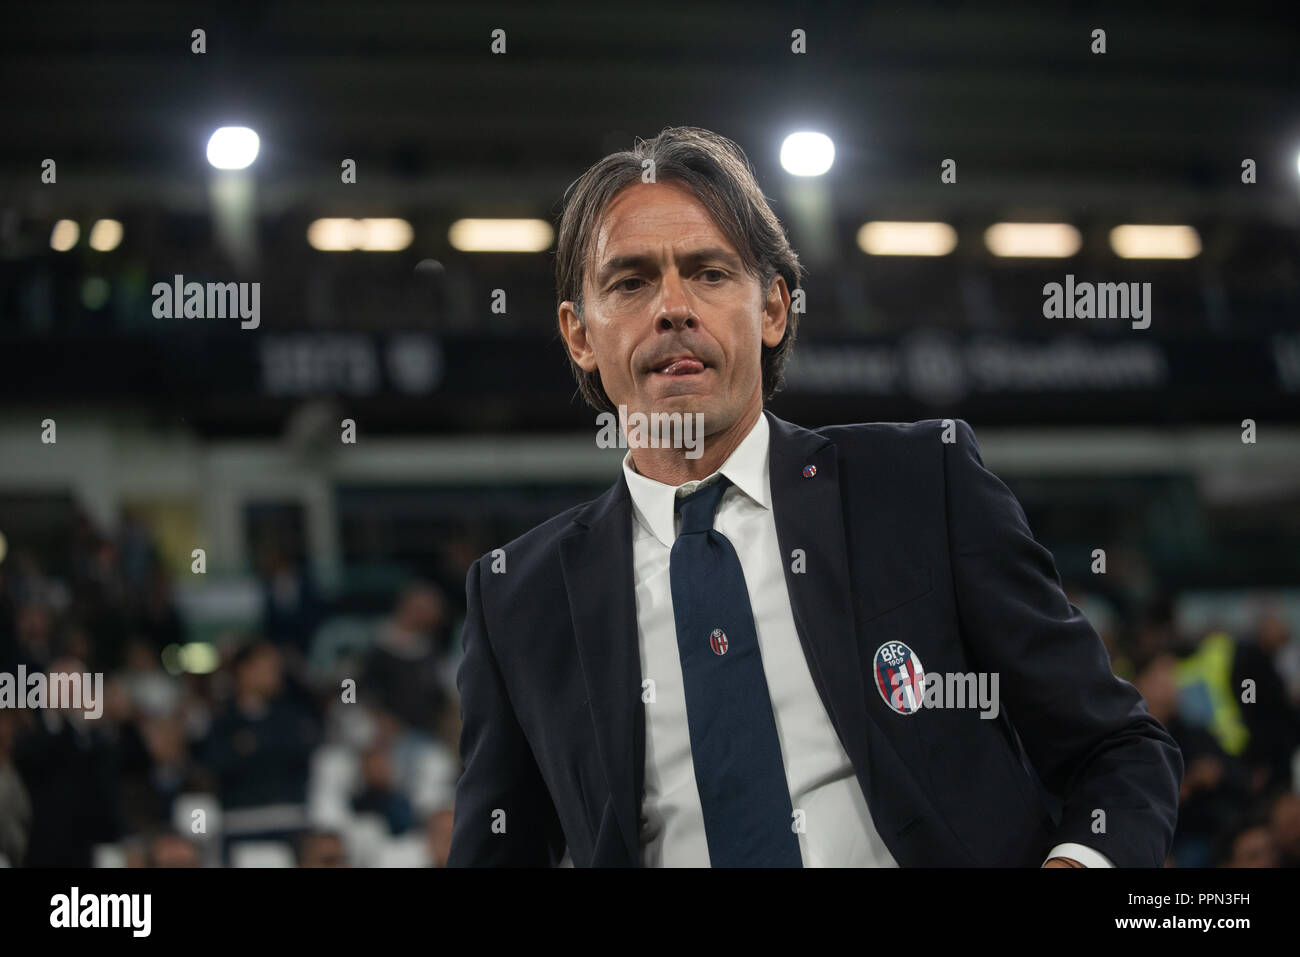 Turin, Italy. 26th September, 2018. The head coach of Bologna Filippo Inzaghi during the Serie A match between Juventus and Bologna at the Allianz Stadium, Juventus won 2-0 in Turin, Italy on 26 September 2018. Credit: Alberto Gandolfo/Alamy Live News Stock Photo